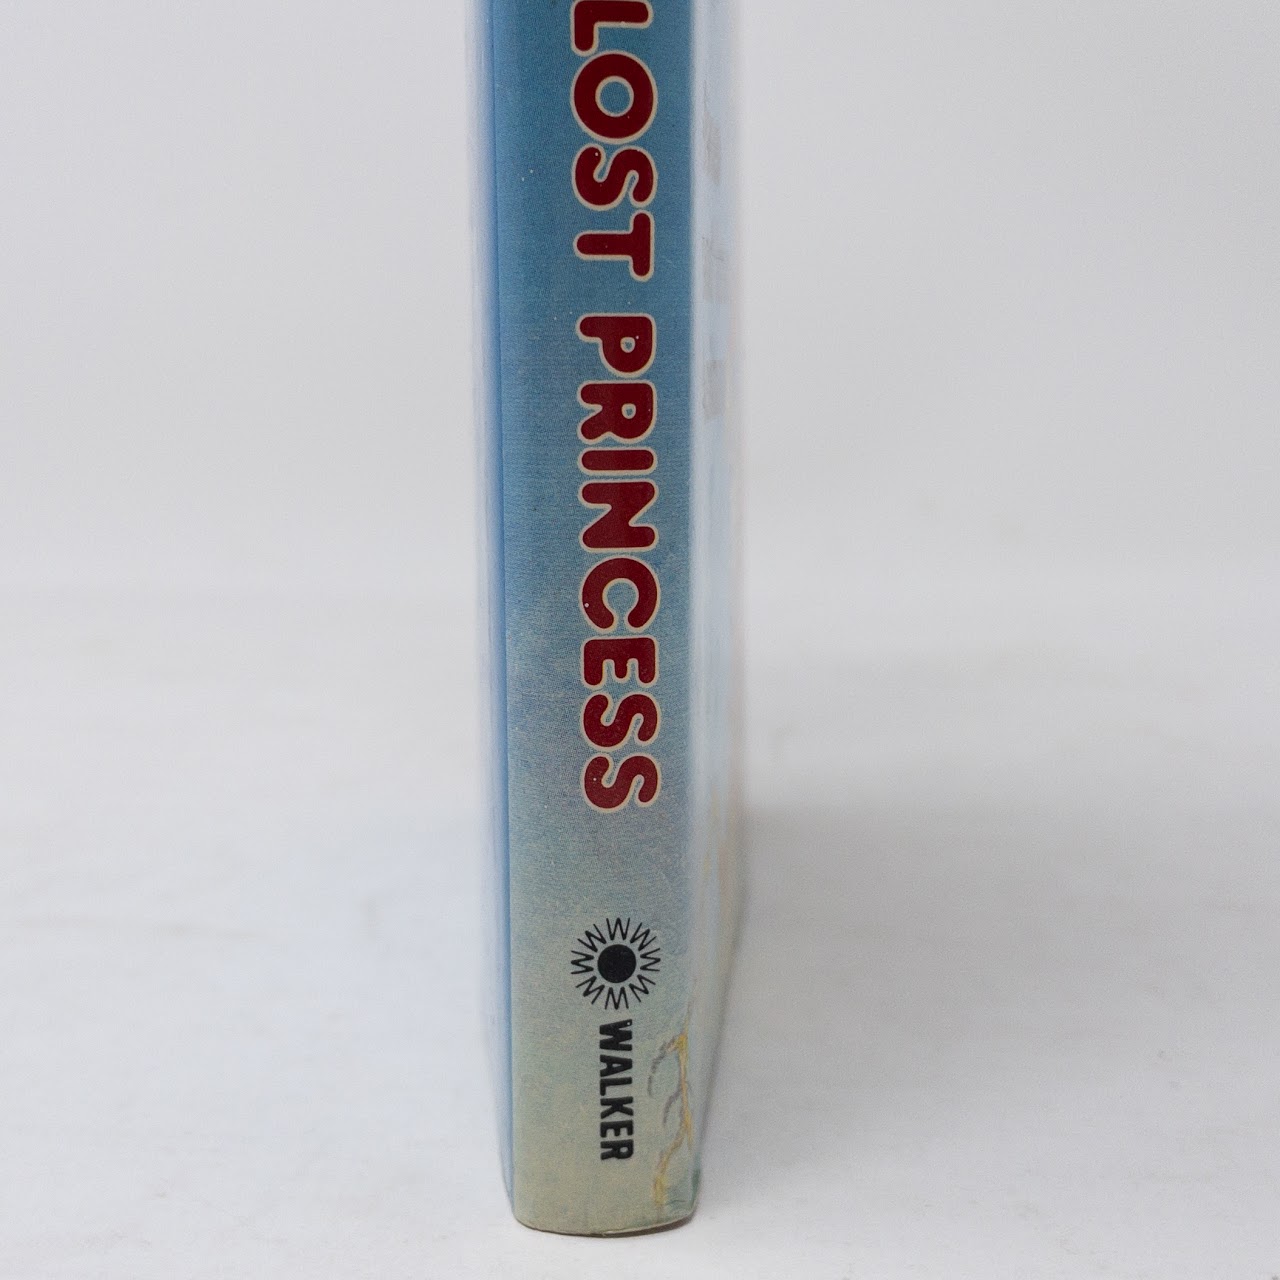 Janet & Isaac Asimov: Norby and the Lost Princess First Edition Book